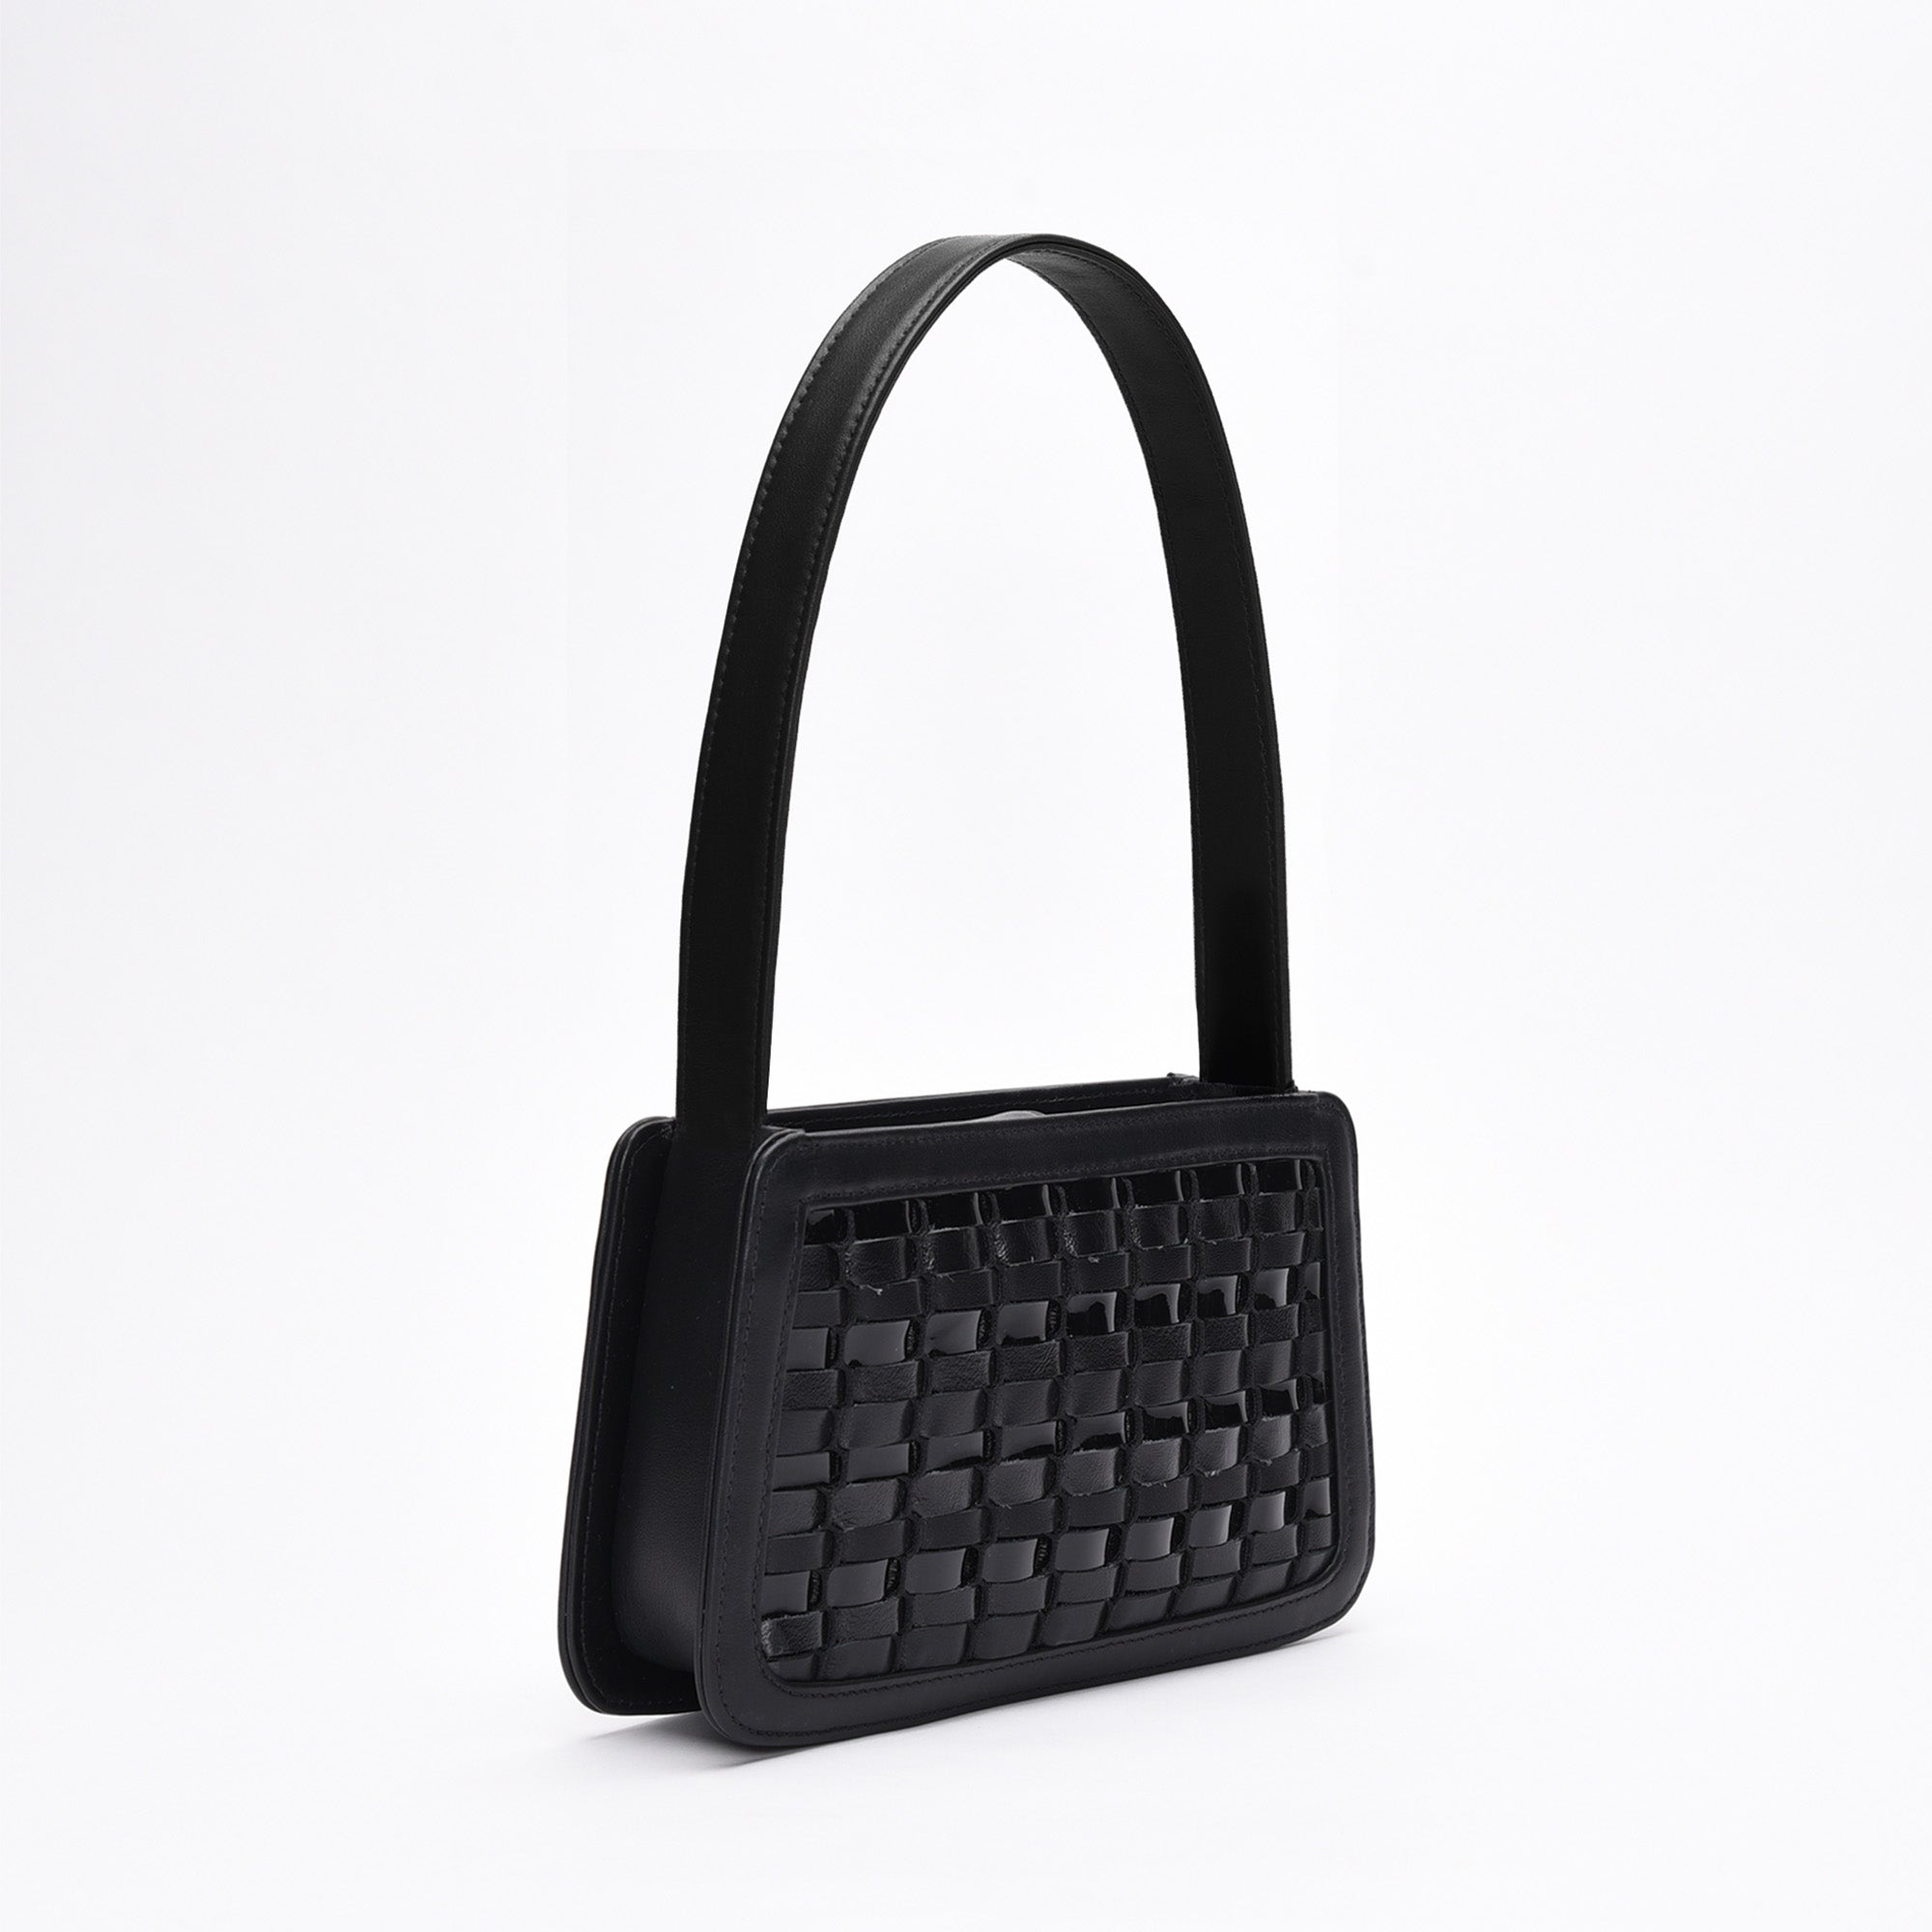 picture of made in USA Luxury Leather Handbag hand-woven with multiple leathers in various matte black colorways